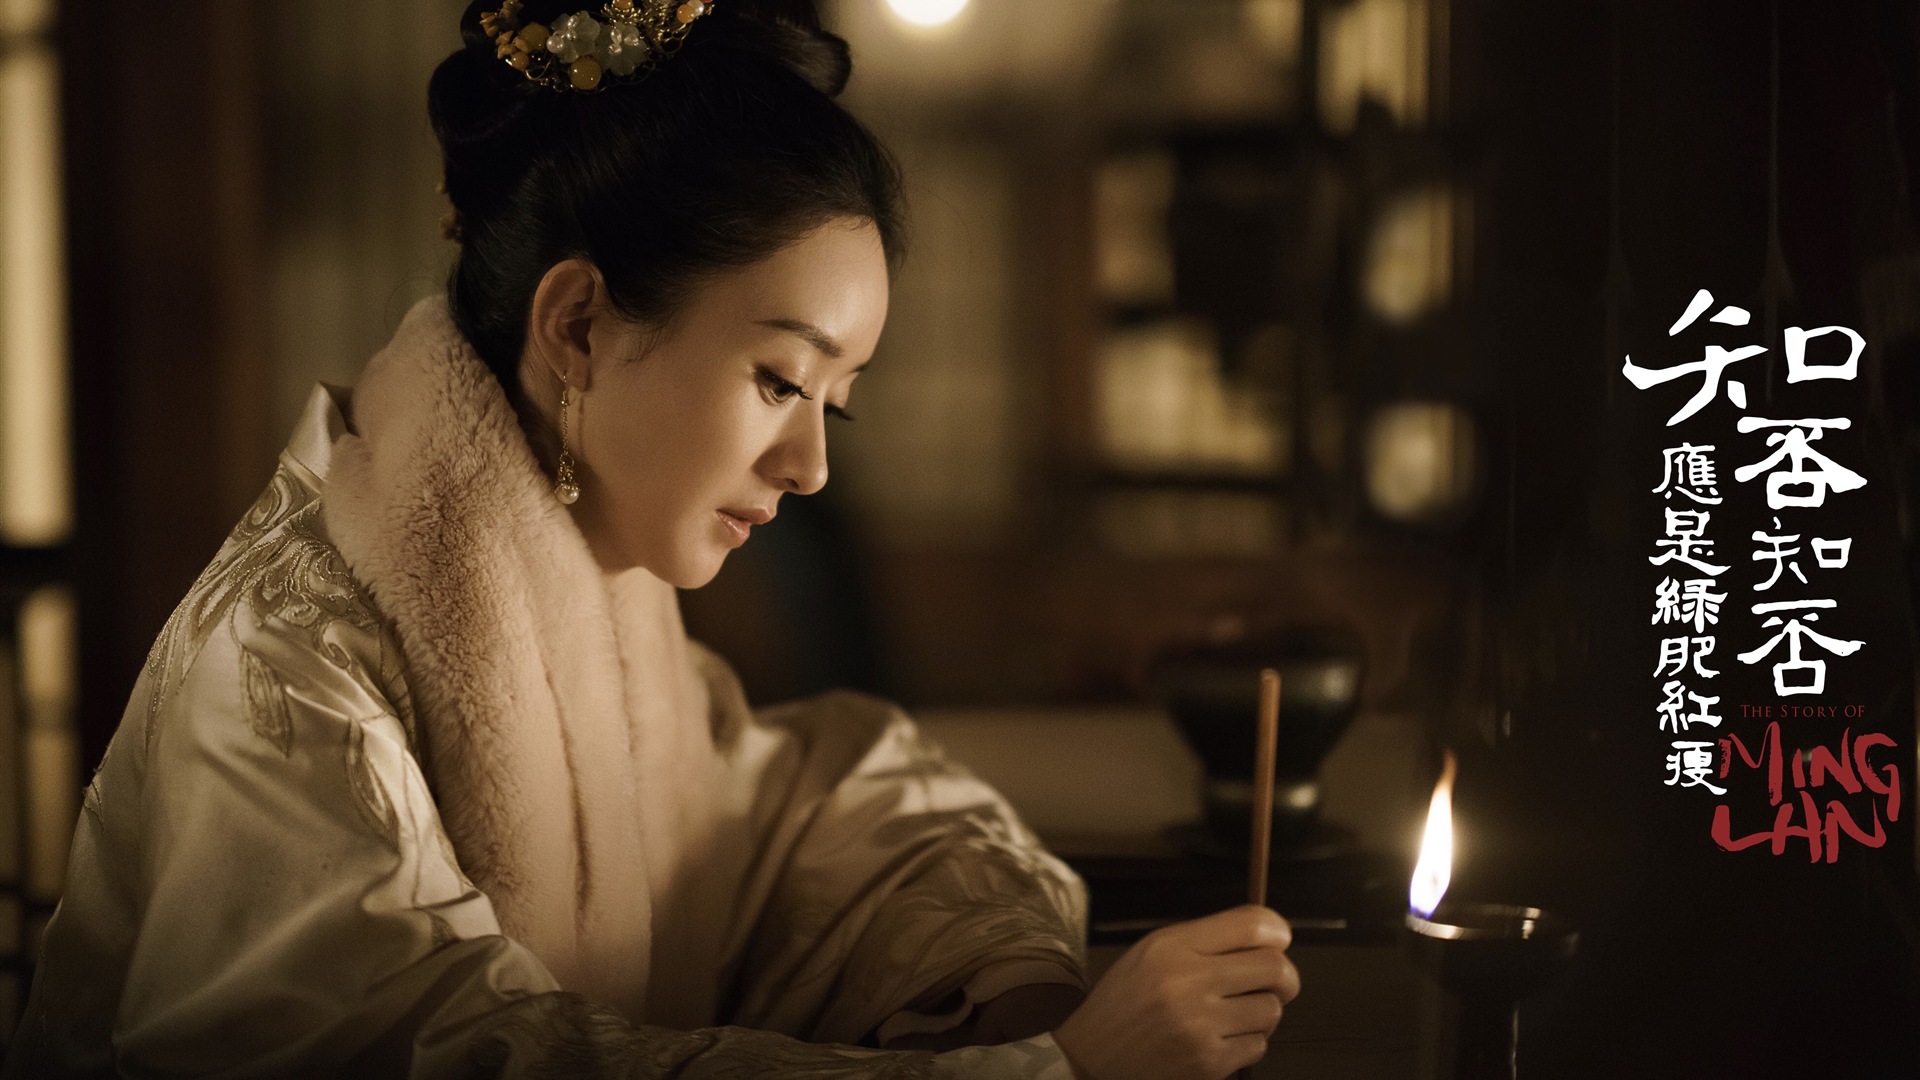 The Story Of MingLan, TV series HD wallpapers #26 - 1920x1080